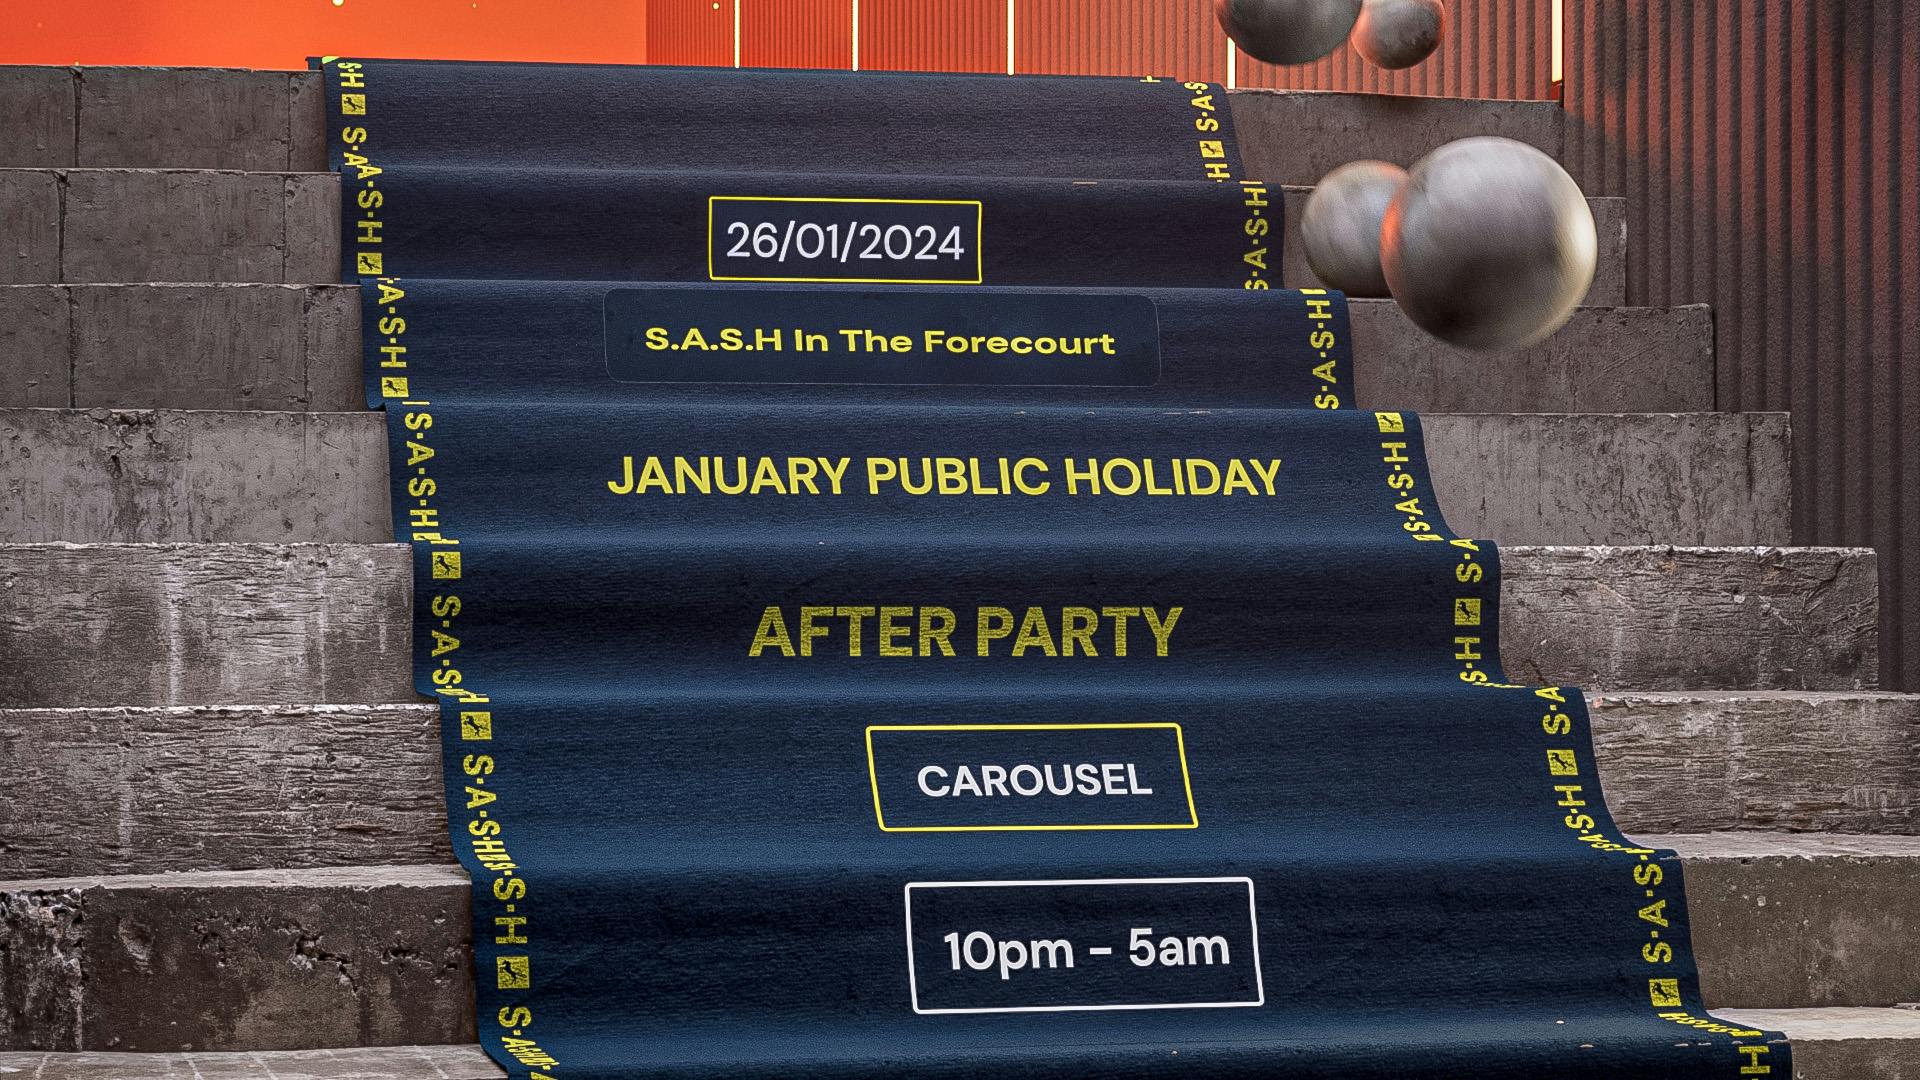 ★ S.A.S.H January Public Holiday ★ AFTER PARTY ★ Fri 26th Jan ★